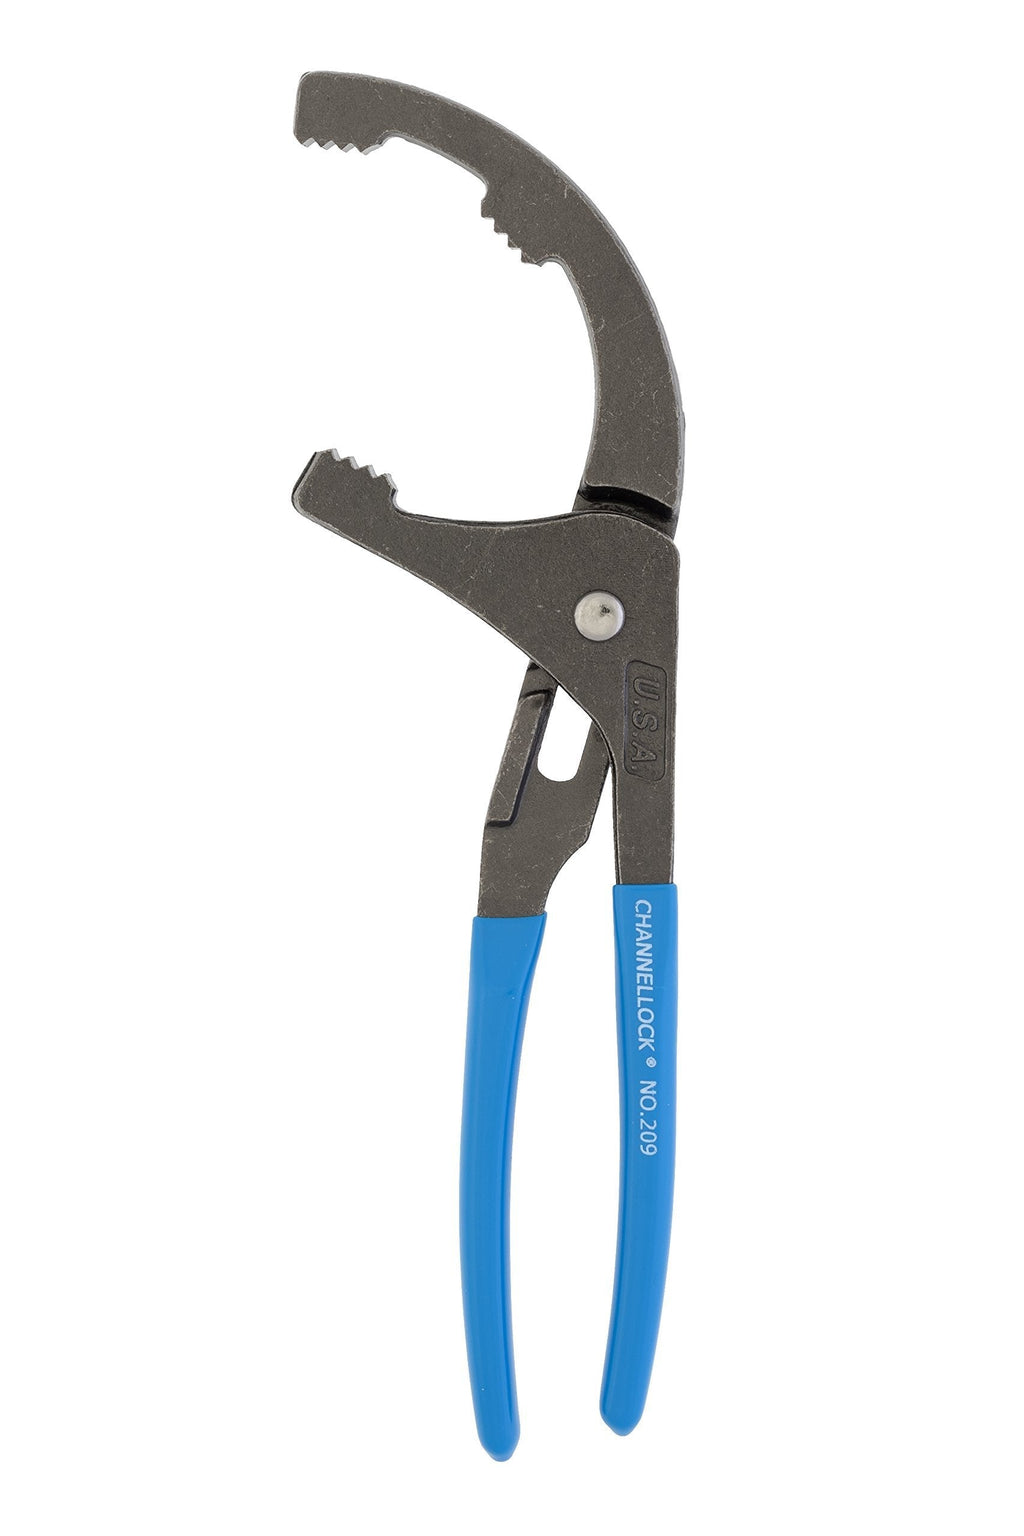 Channellock 209 9-Inch Oil Filter & PVC Pliers | Ideal for Engine Filters, Conduit, and Fittings | Forged from High Carbon Steel | Made in the USA,Blue - NewNest Australia